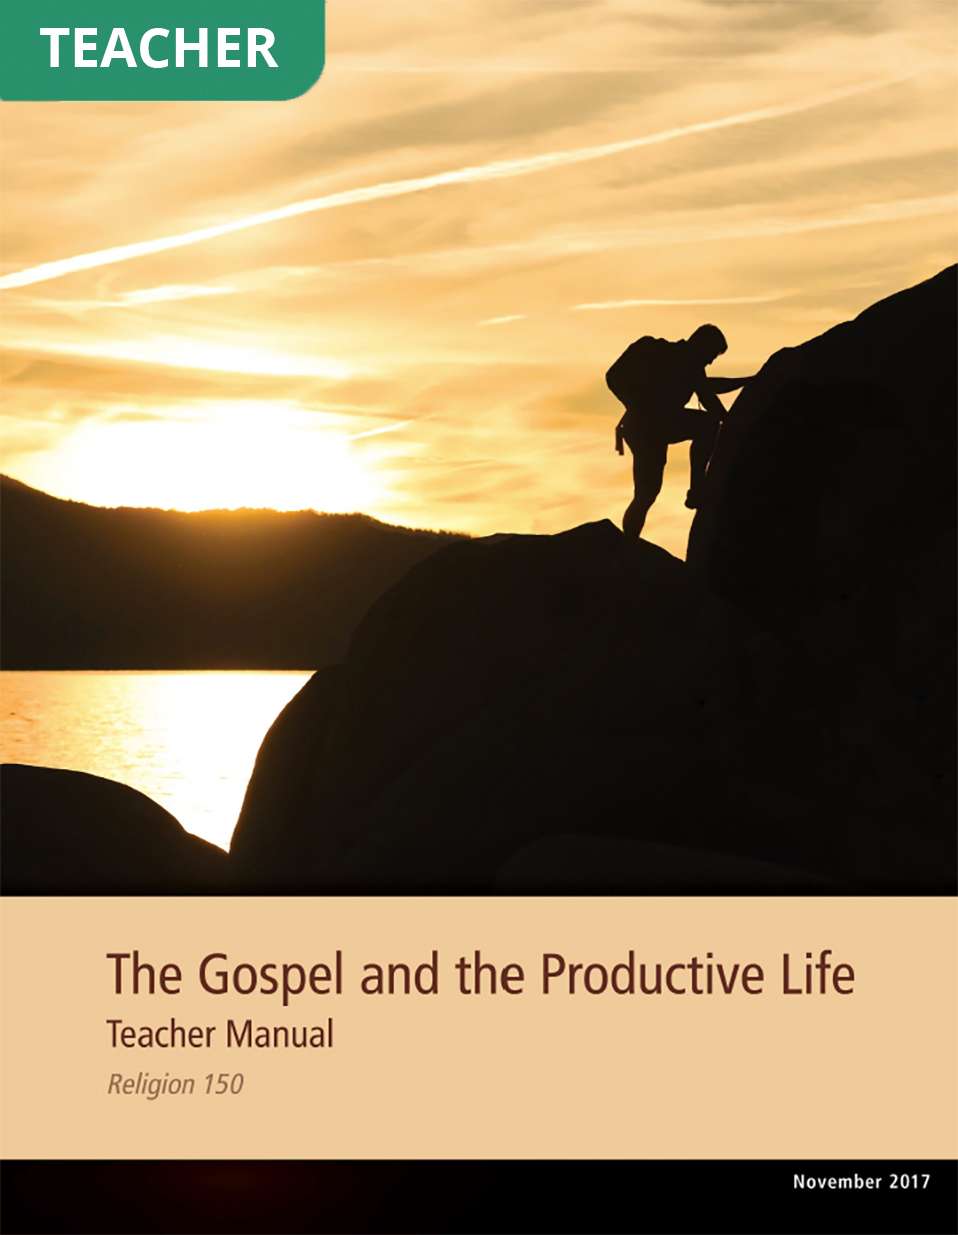 The Gospel and the Productive Life Teacher Manual (Rel 150)